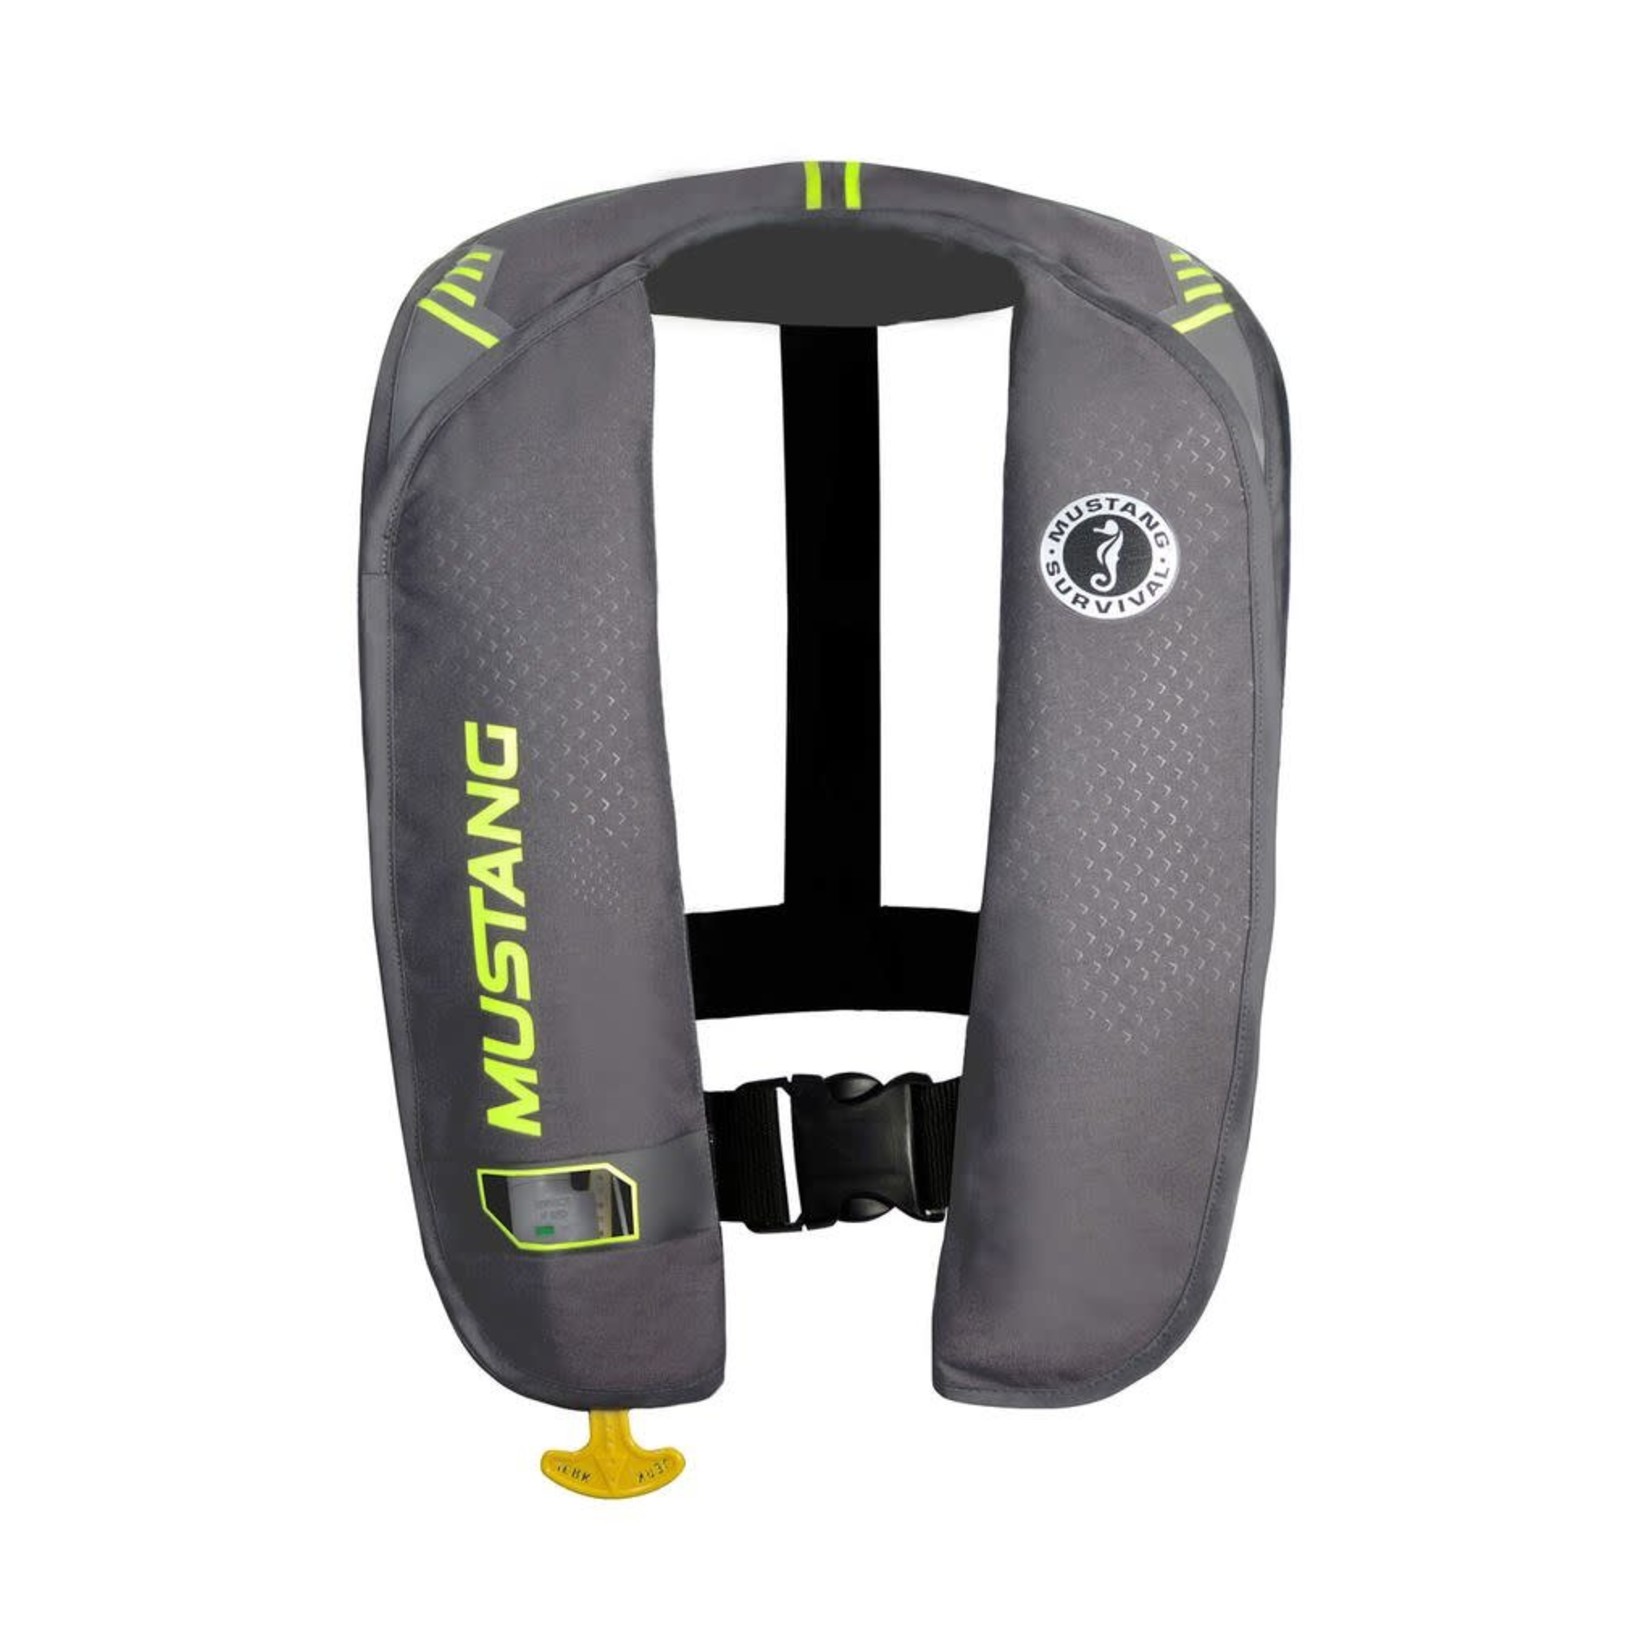 Mustang Survival Mustang Survival M.I.T. 100 Inflatable PFD (Manual)